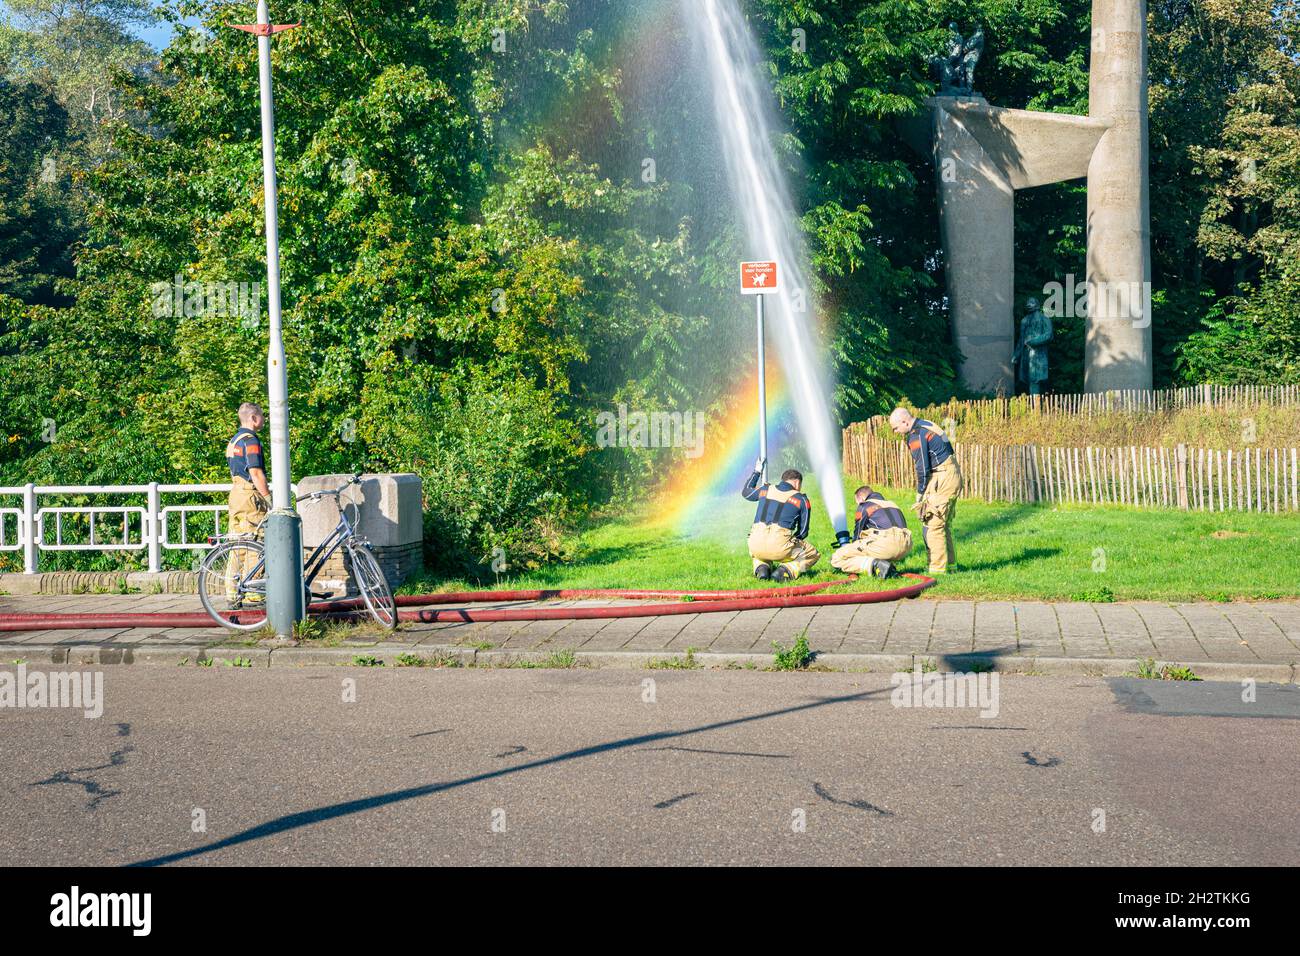 The Hague, Netherlands - October 8, 2021: Firefighters do an exercise near Troelstra Monument in the city of The Hague, The Netherlands. Stock Photo